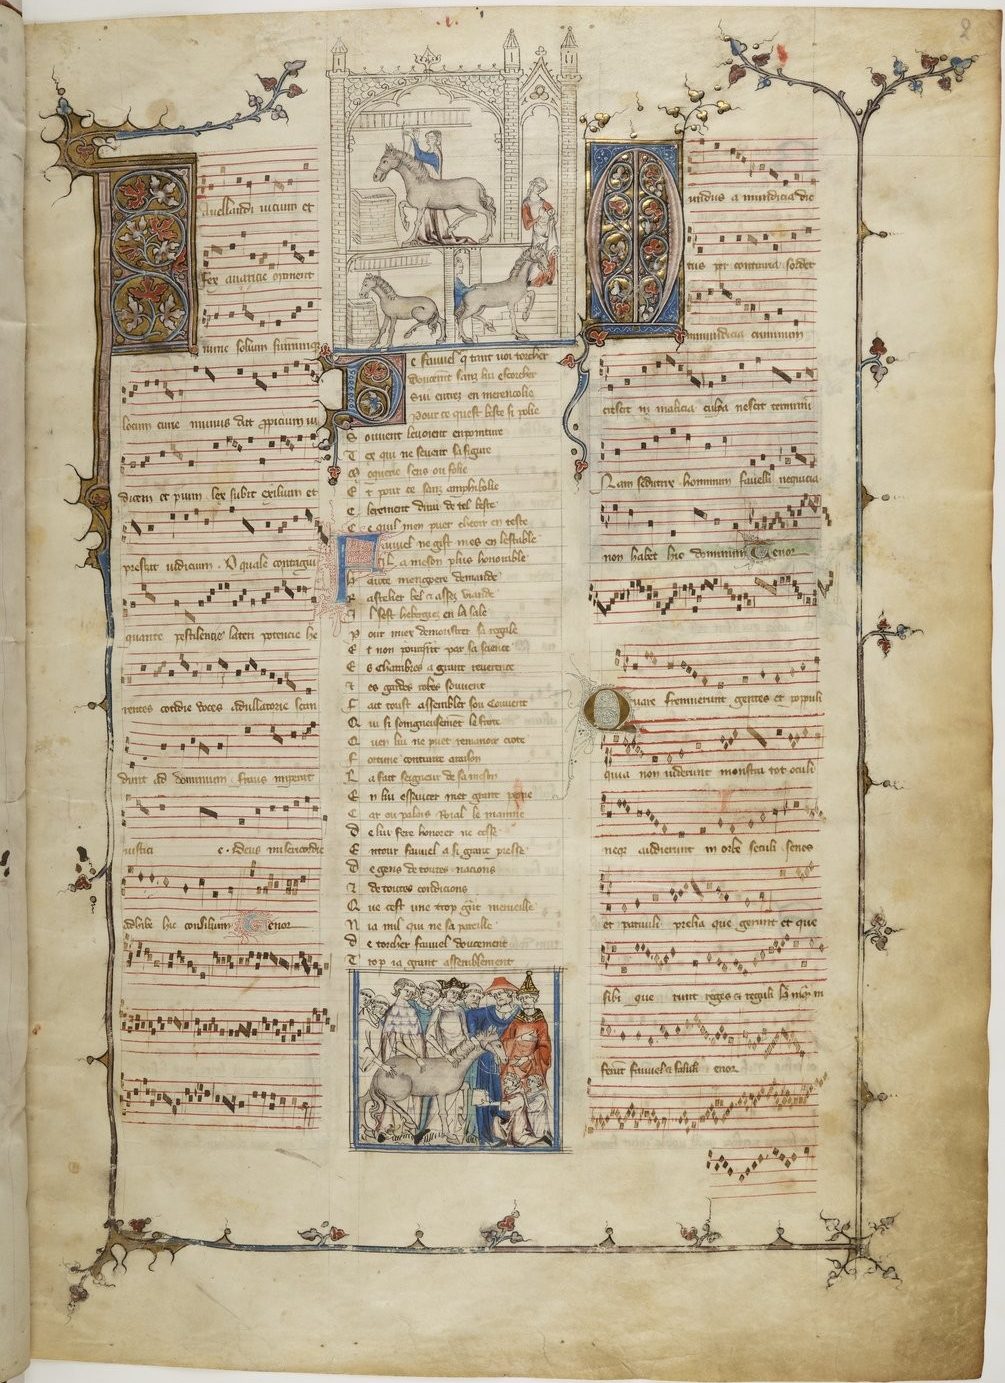 A manuscript page with music written in the Ars Nova style